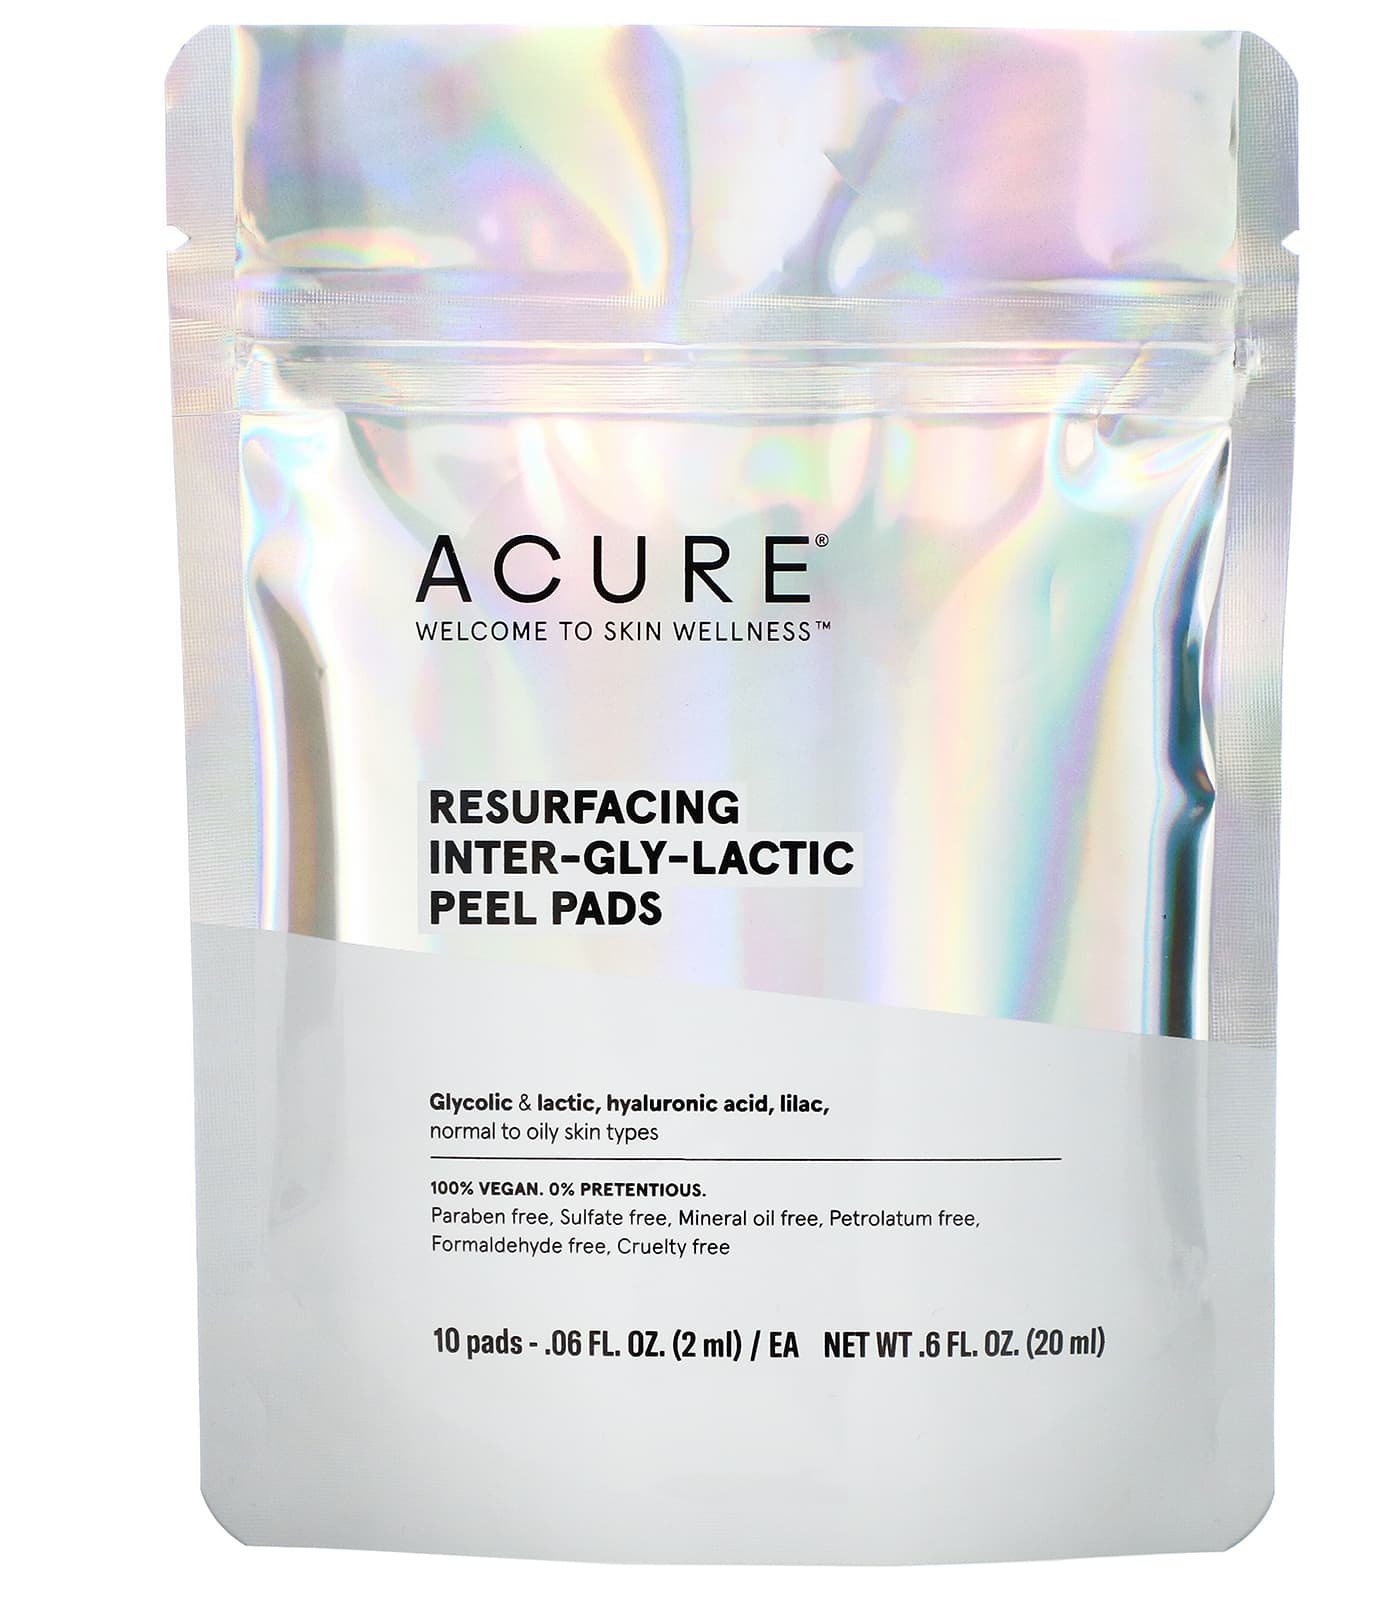 Acure Resurfacing Inter-gly-lactic Peel Pads